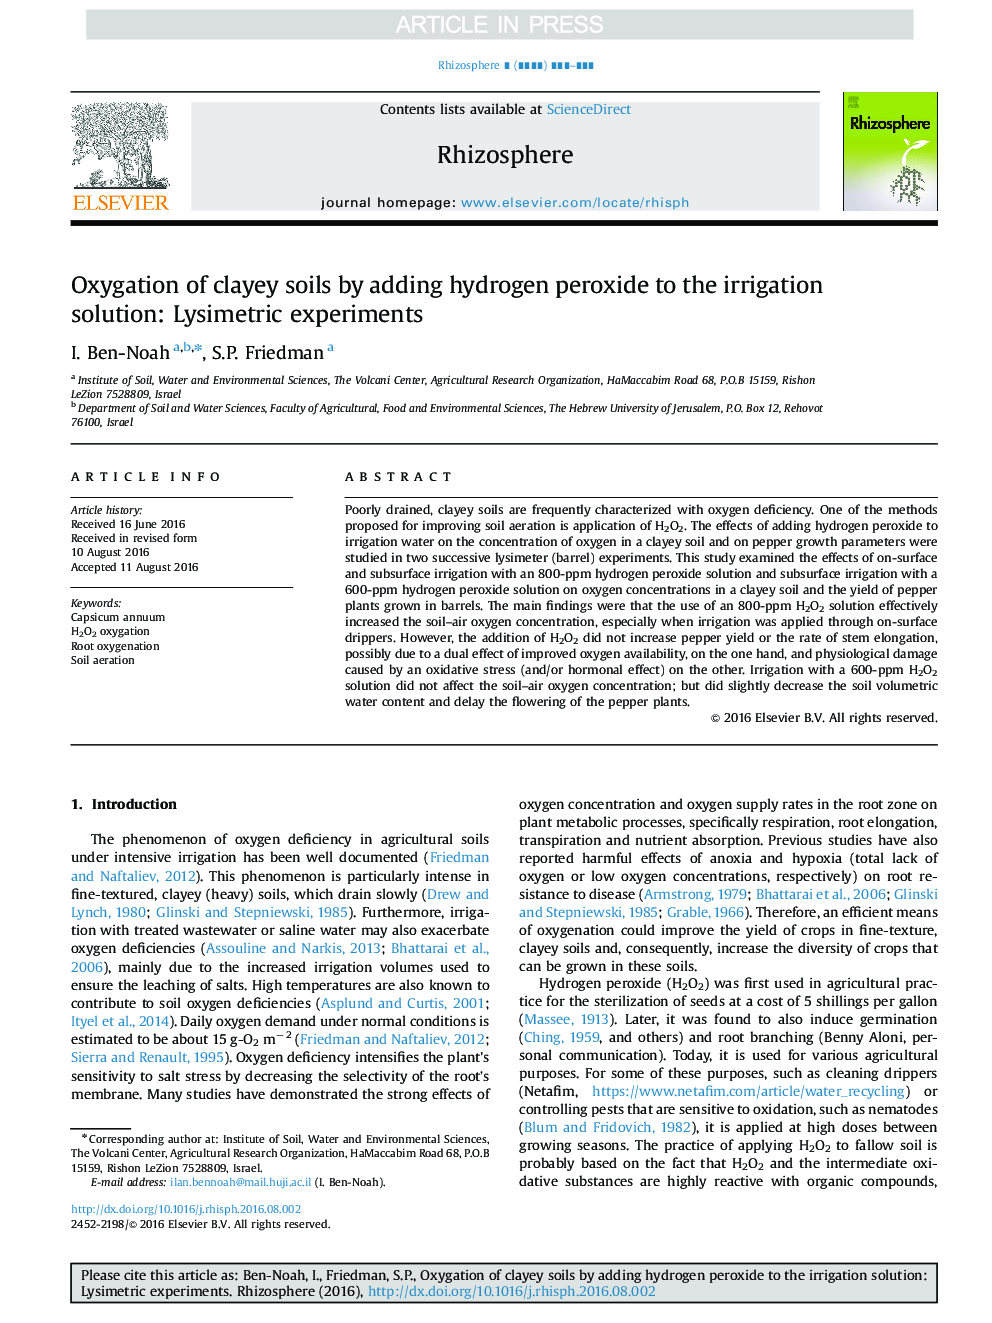 Oxygation of clayey soils by adding hydrogen peroxide to the irrigation solution: Lysimetric experiments